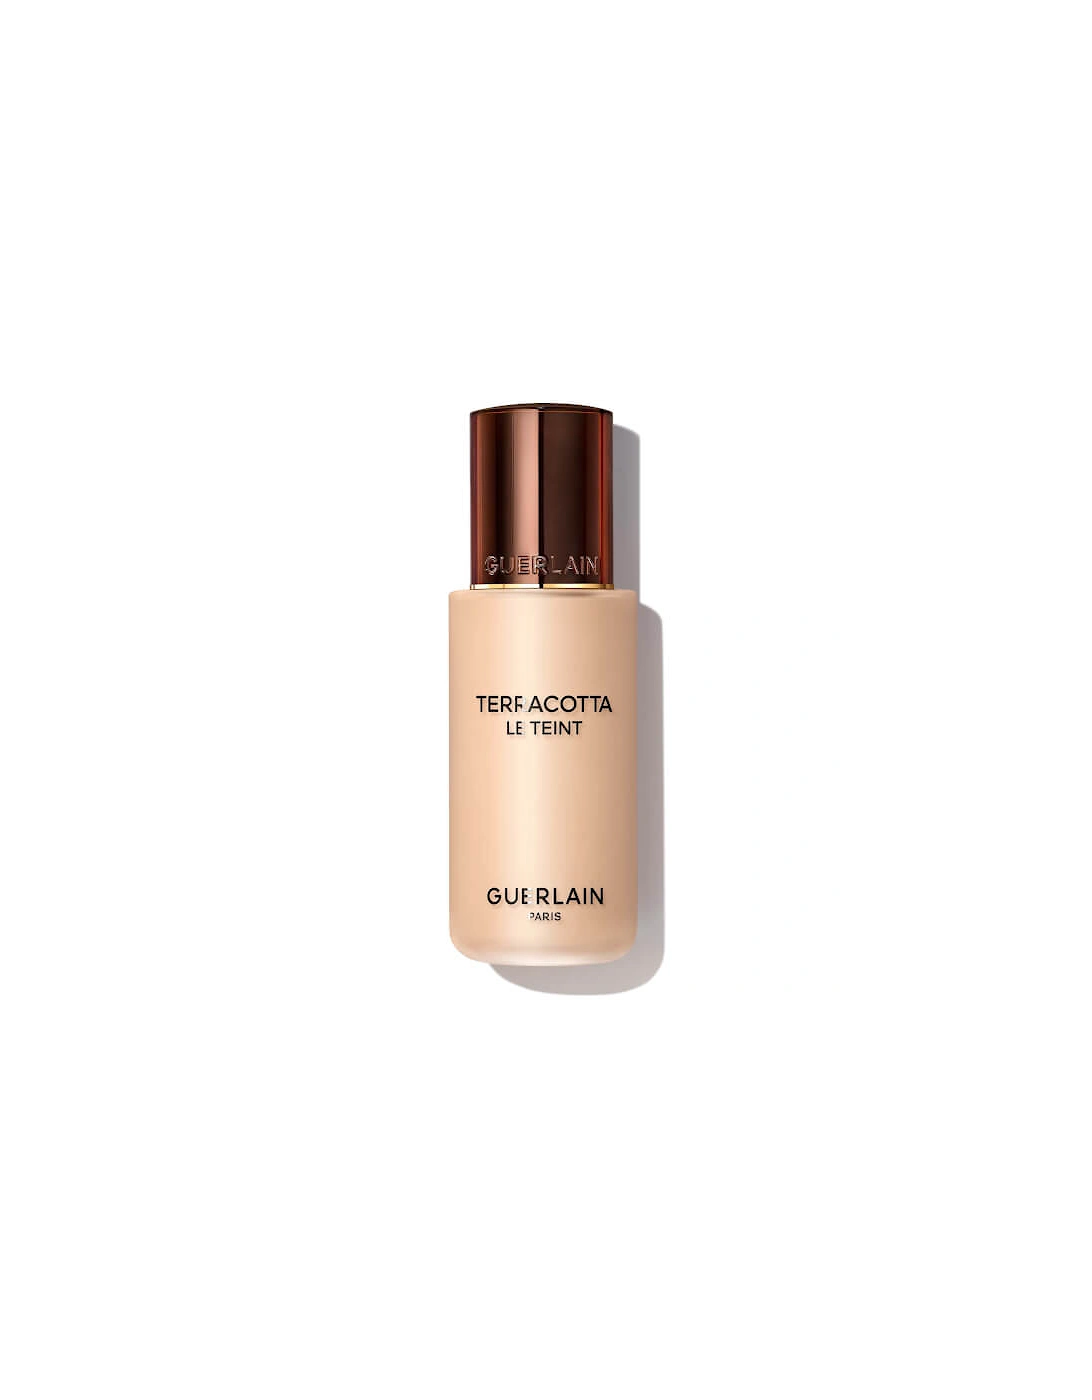 Terracotta Le Teint Healthy Glow Natural Perfection Foundation - 1.5N, 2 of 1